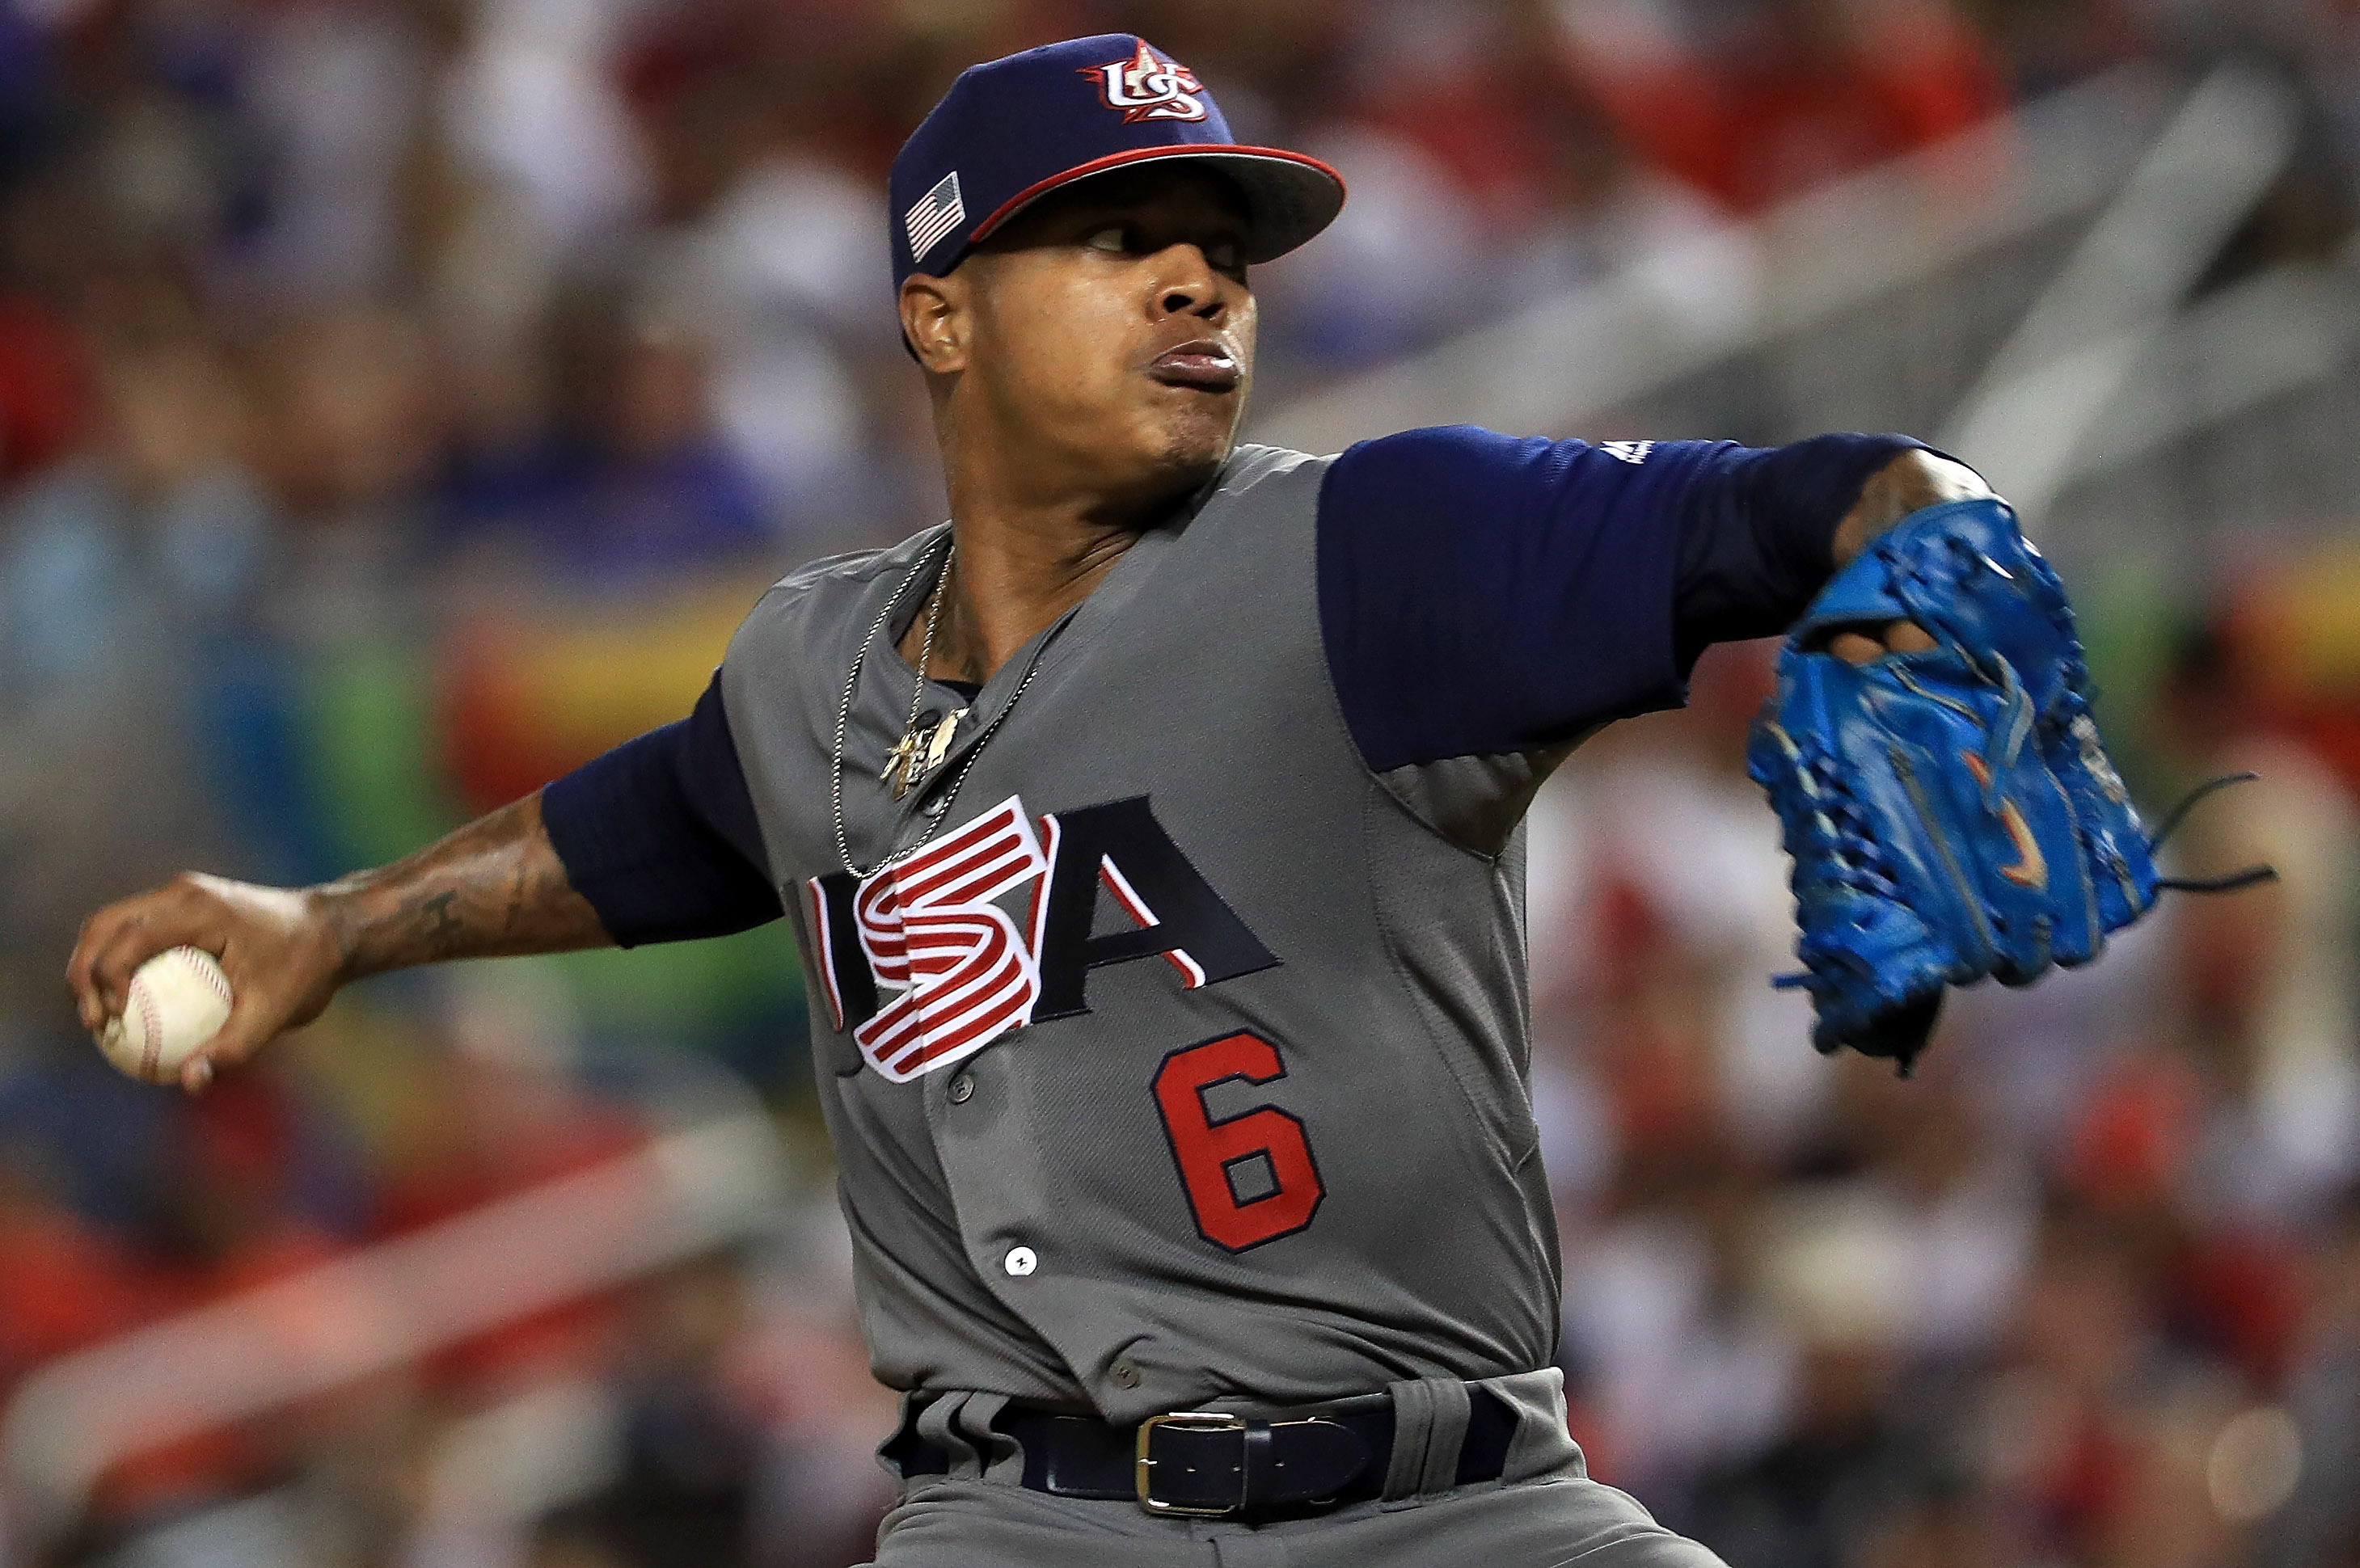 Marcus Stroman Says Mother Has Been Harassed After Decision to